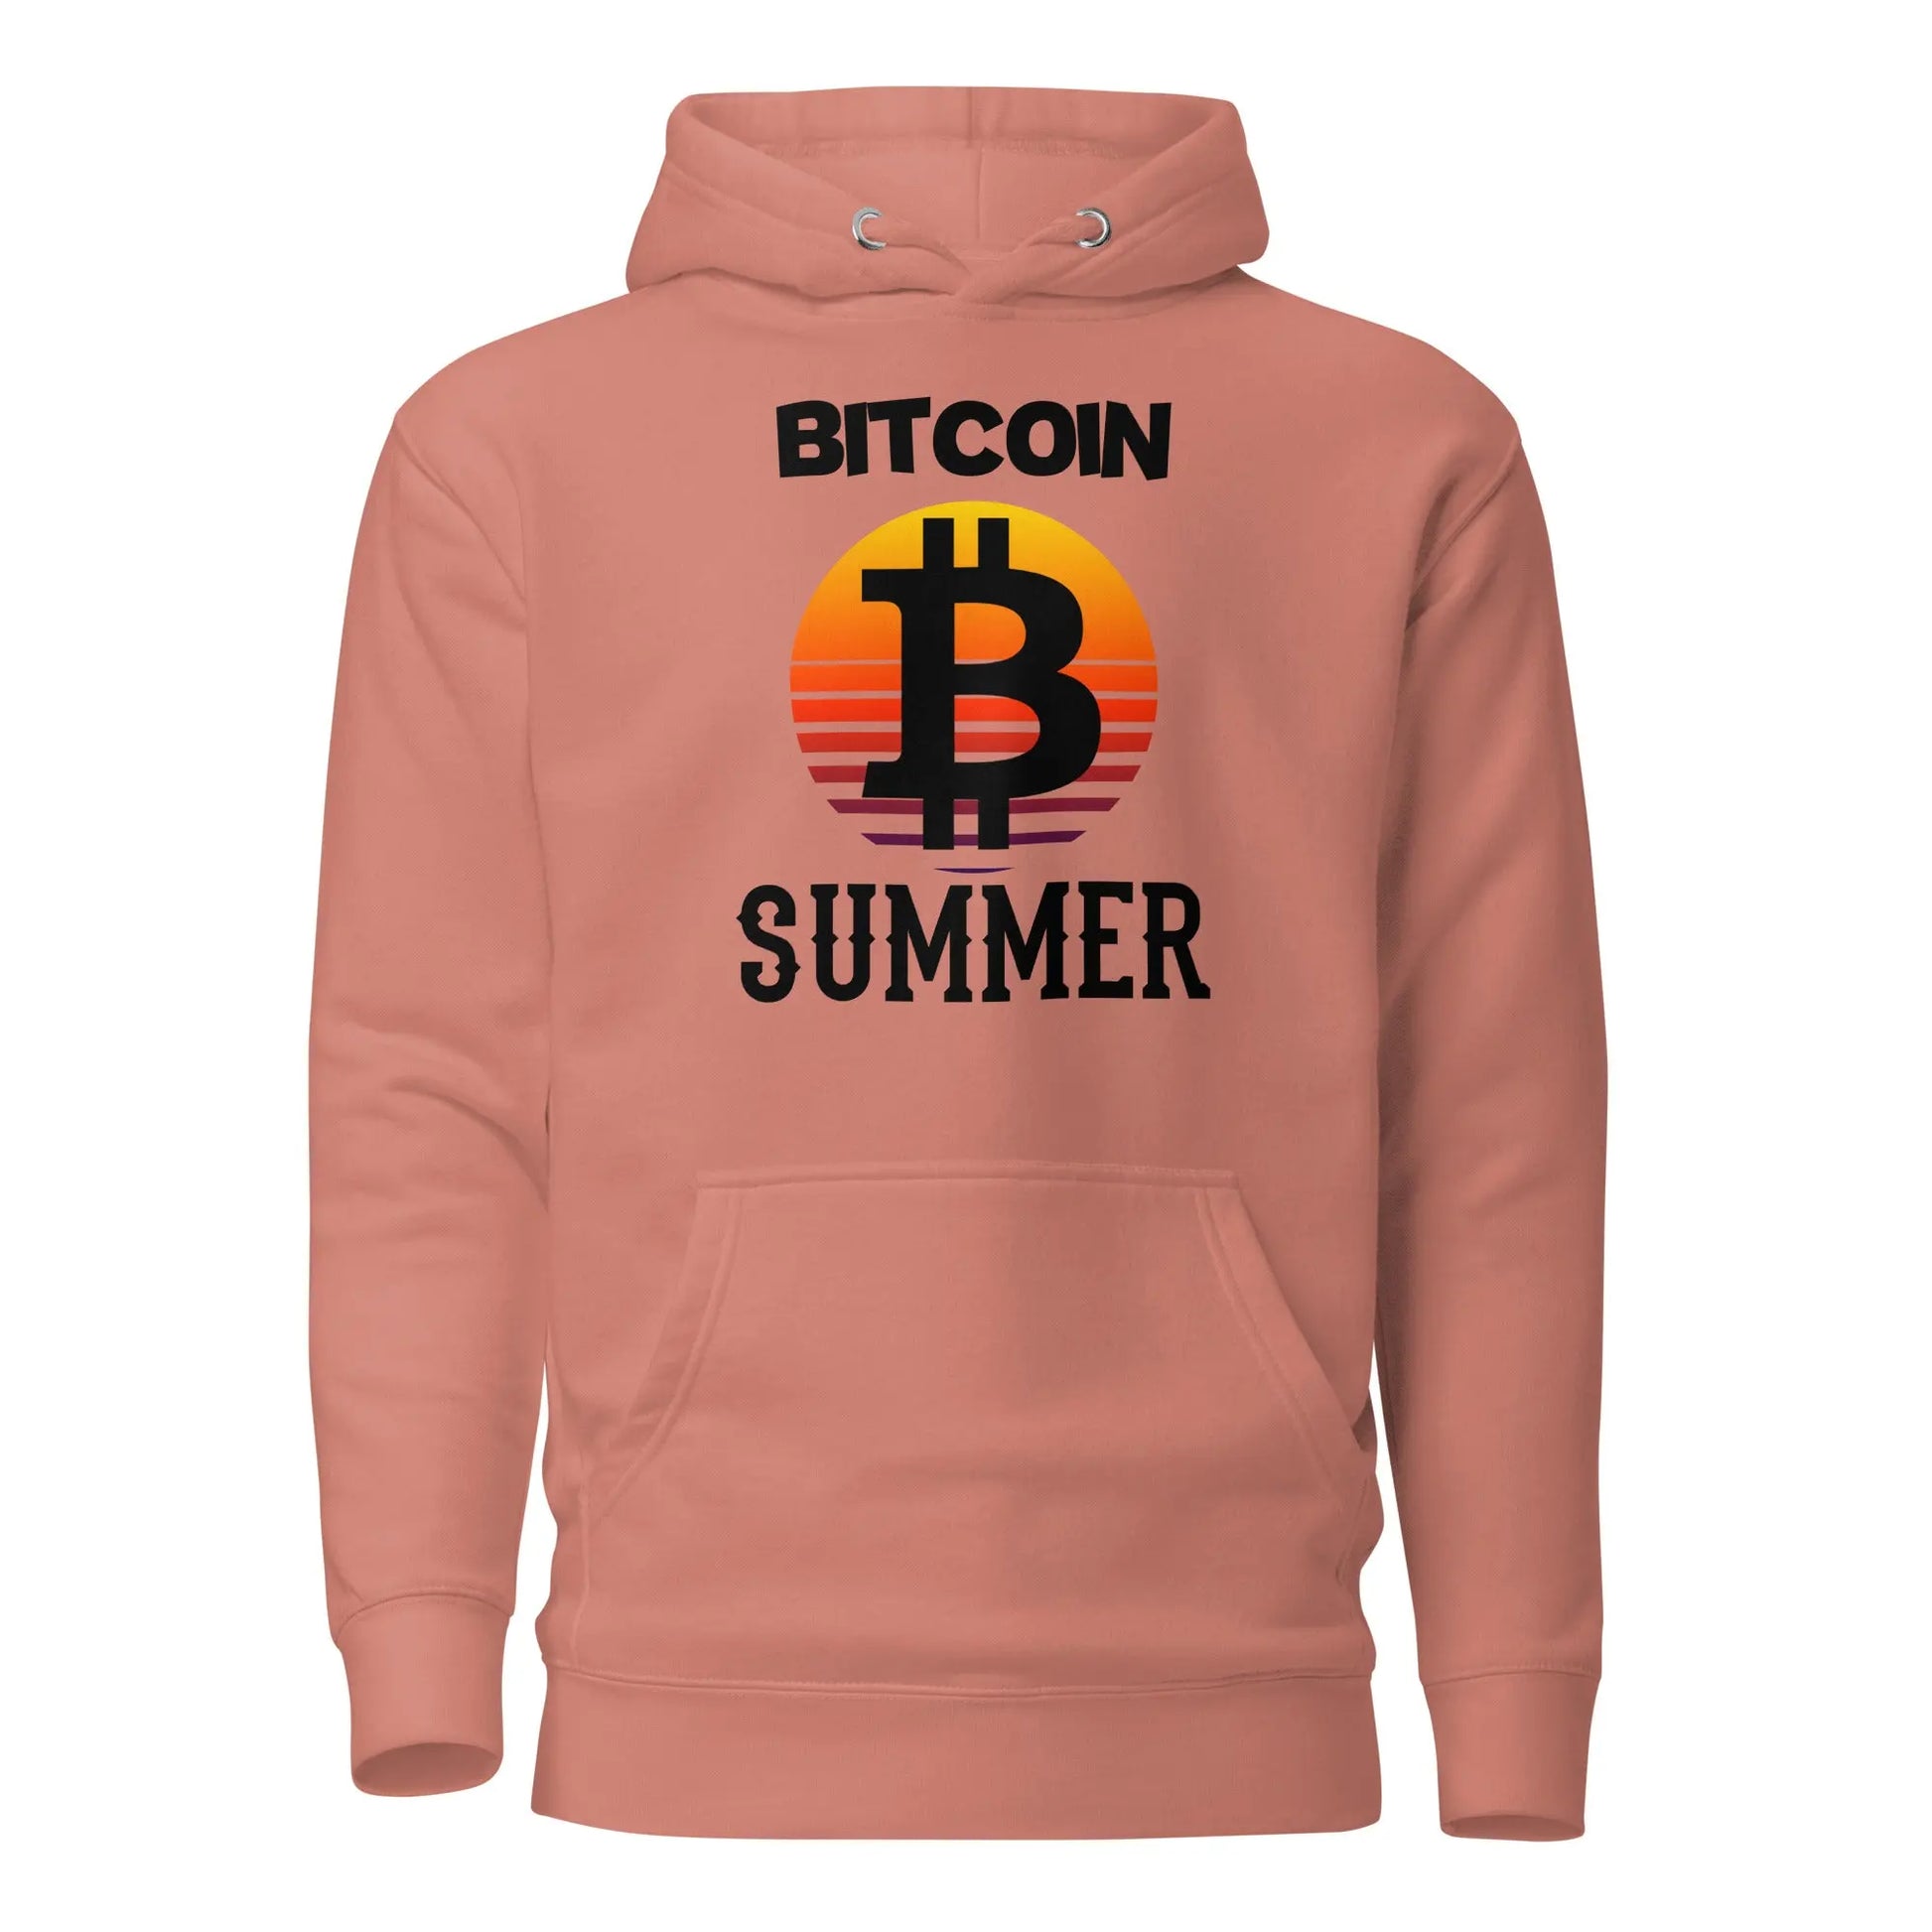 Bitcoin Summer - Premium Unisex Bitcoin Hoodie Dusty Rose Color - Store of Value